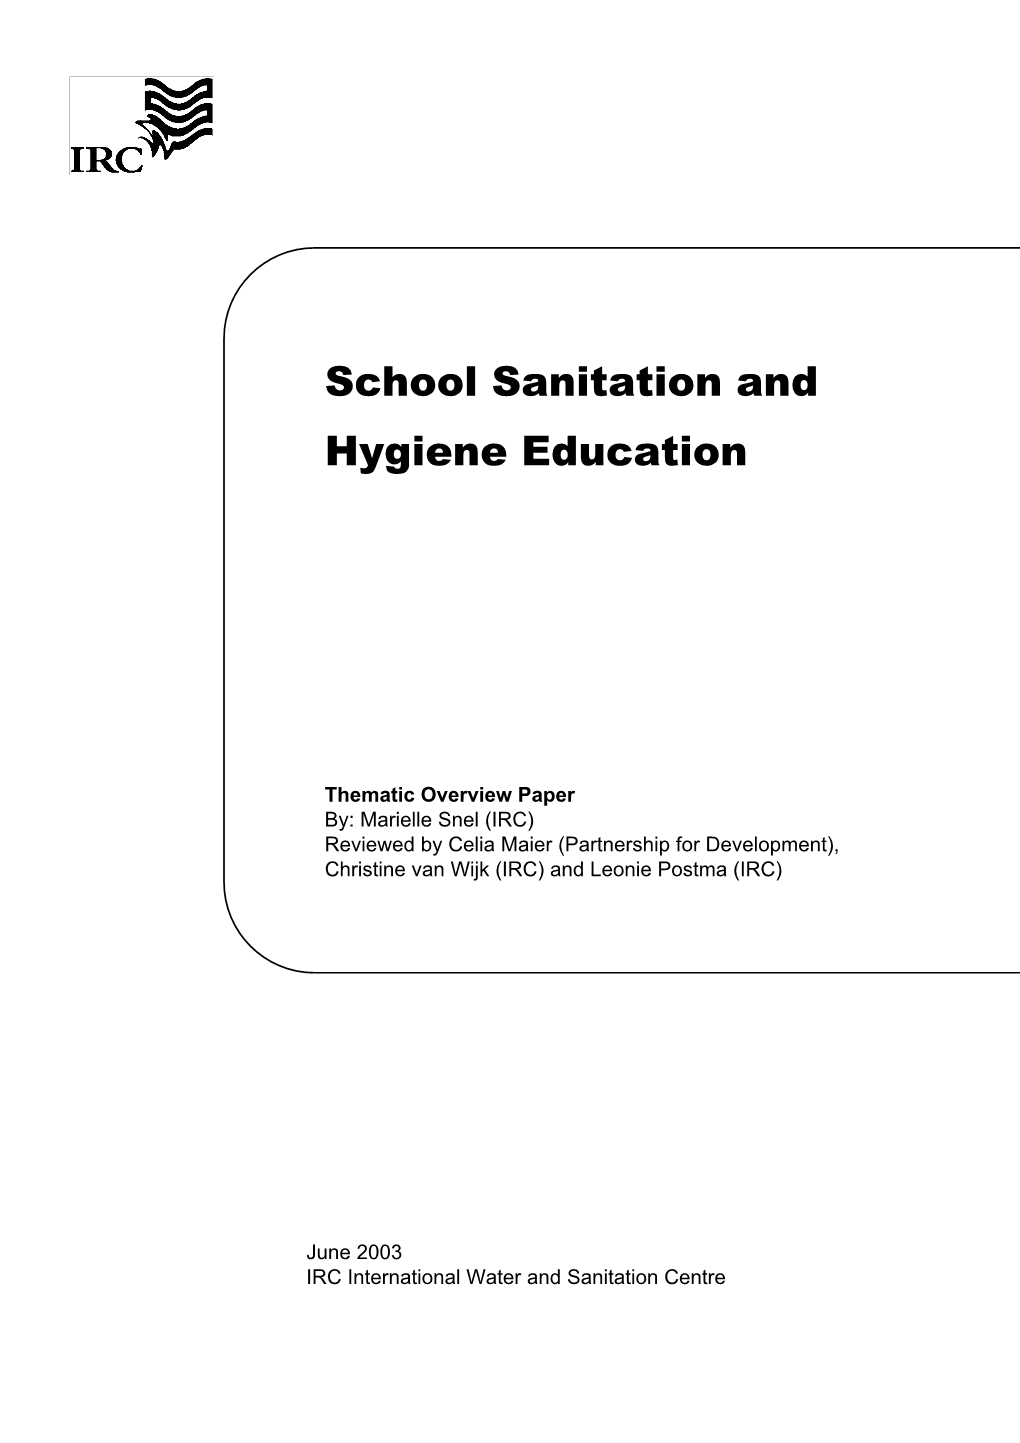 School Sanitation and Hygiene Education 10 Focus of This TOP 10 Why Does the Theme SSHE Really Matter? 10